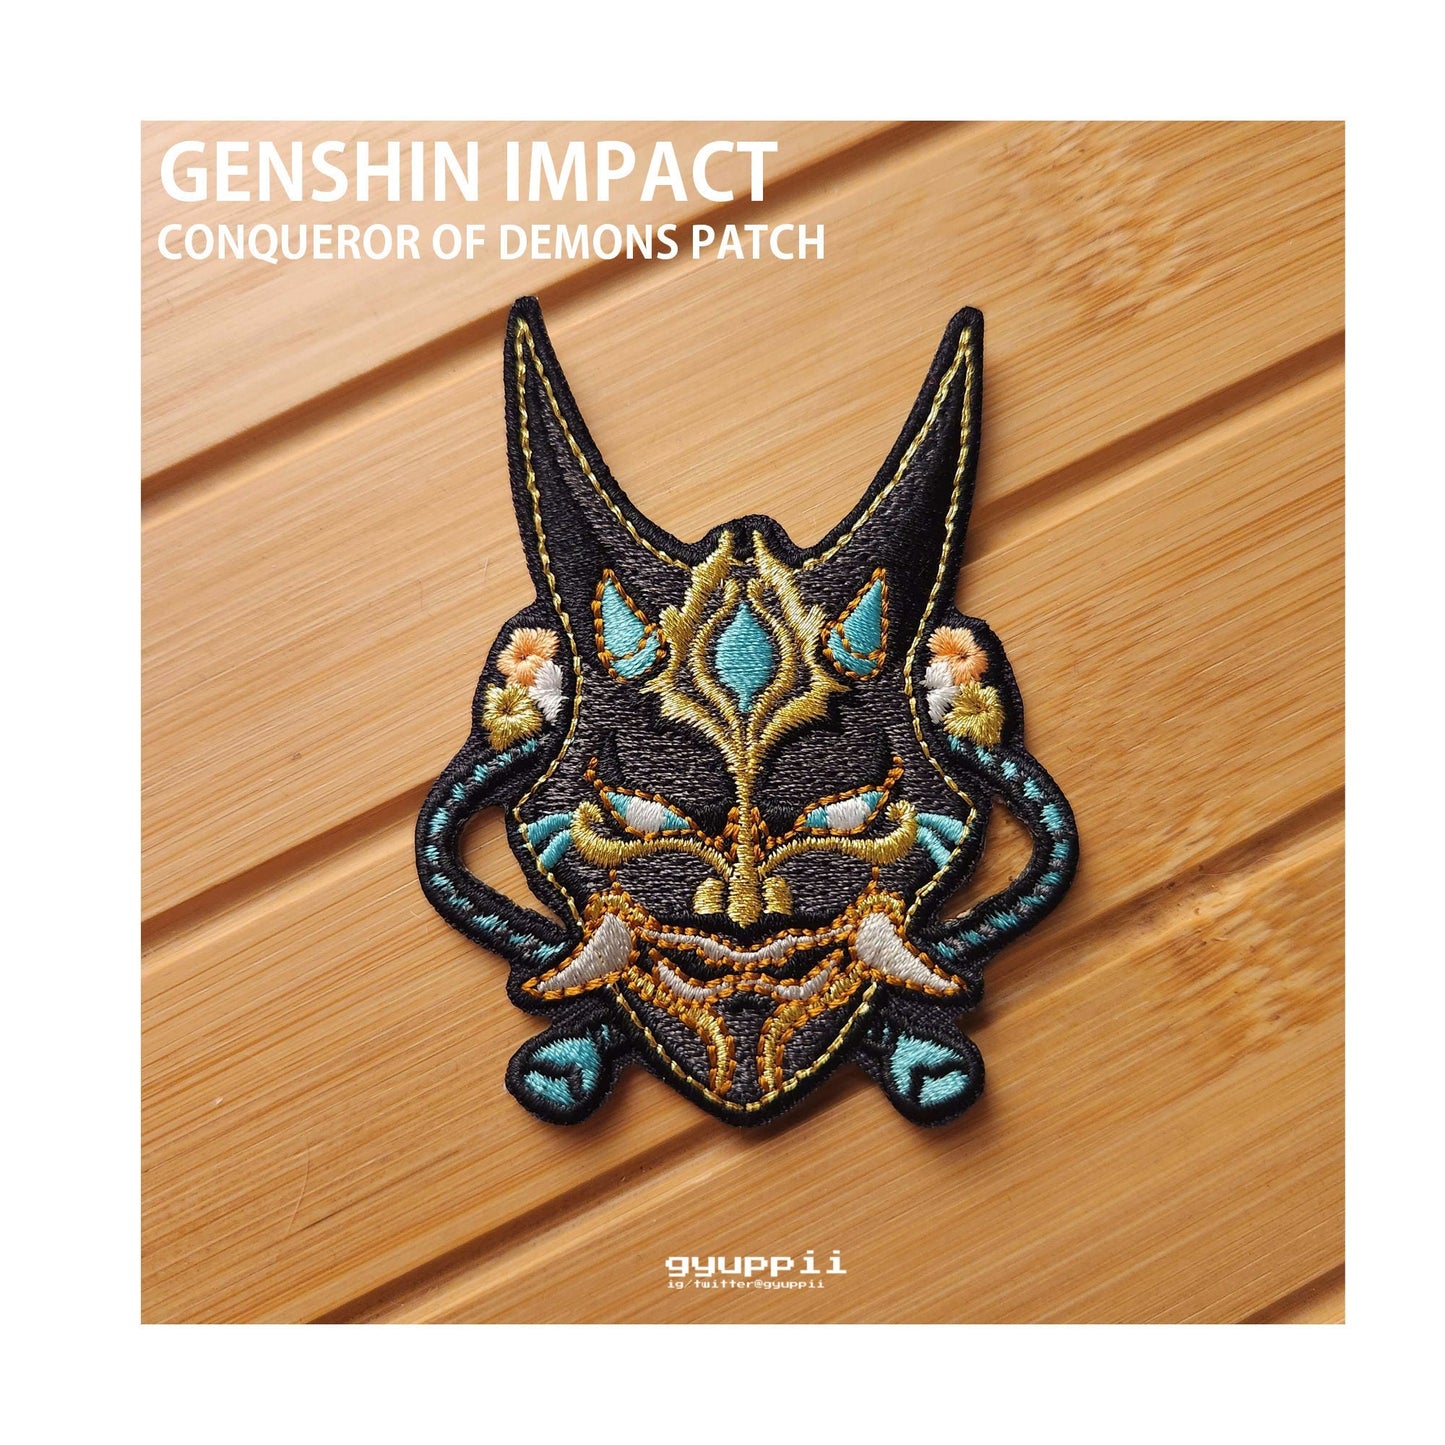 Xiao Genshin Impact Iron-On Patch Conqueror of Demons Mask Oni